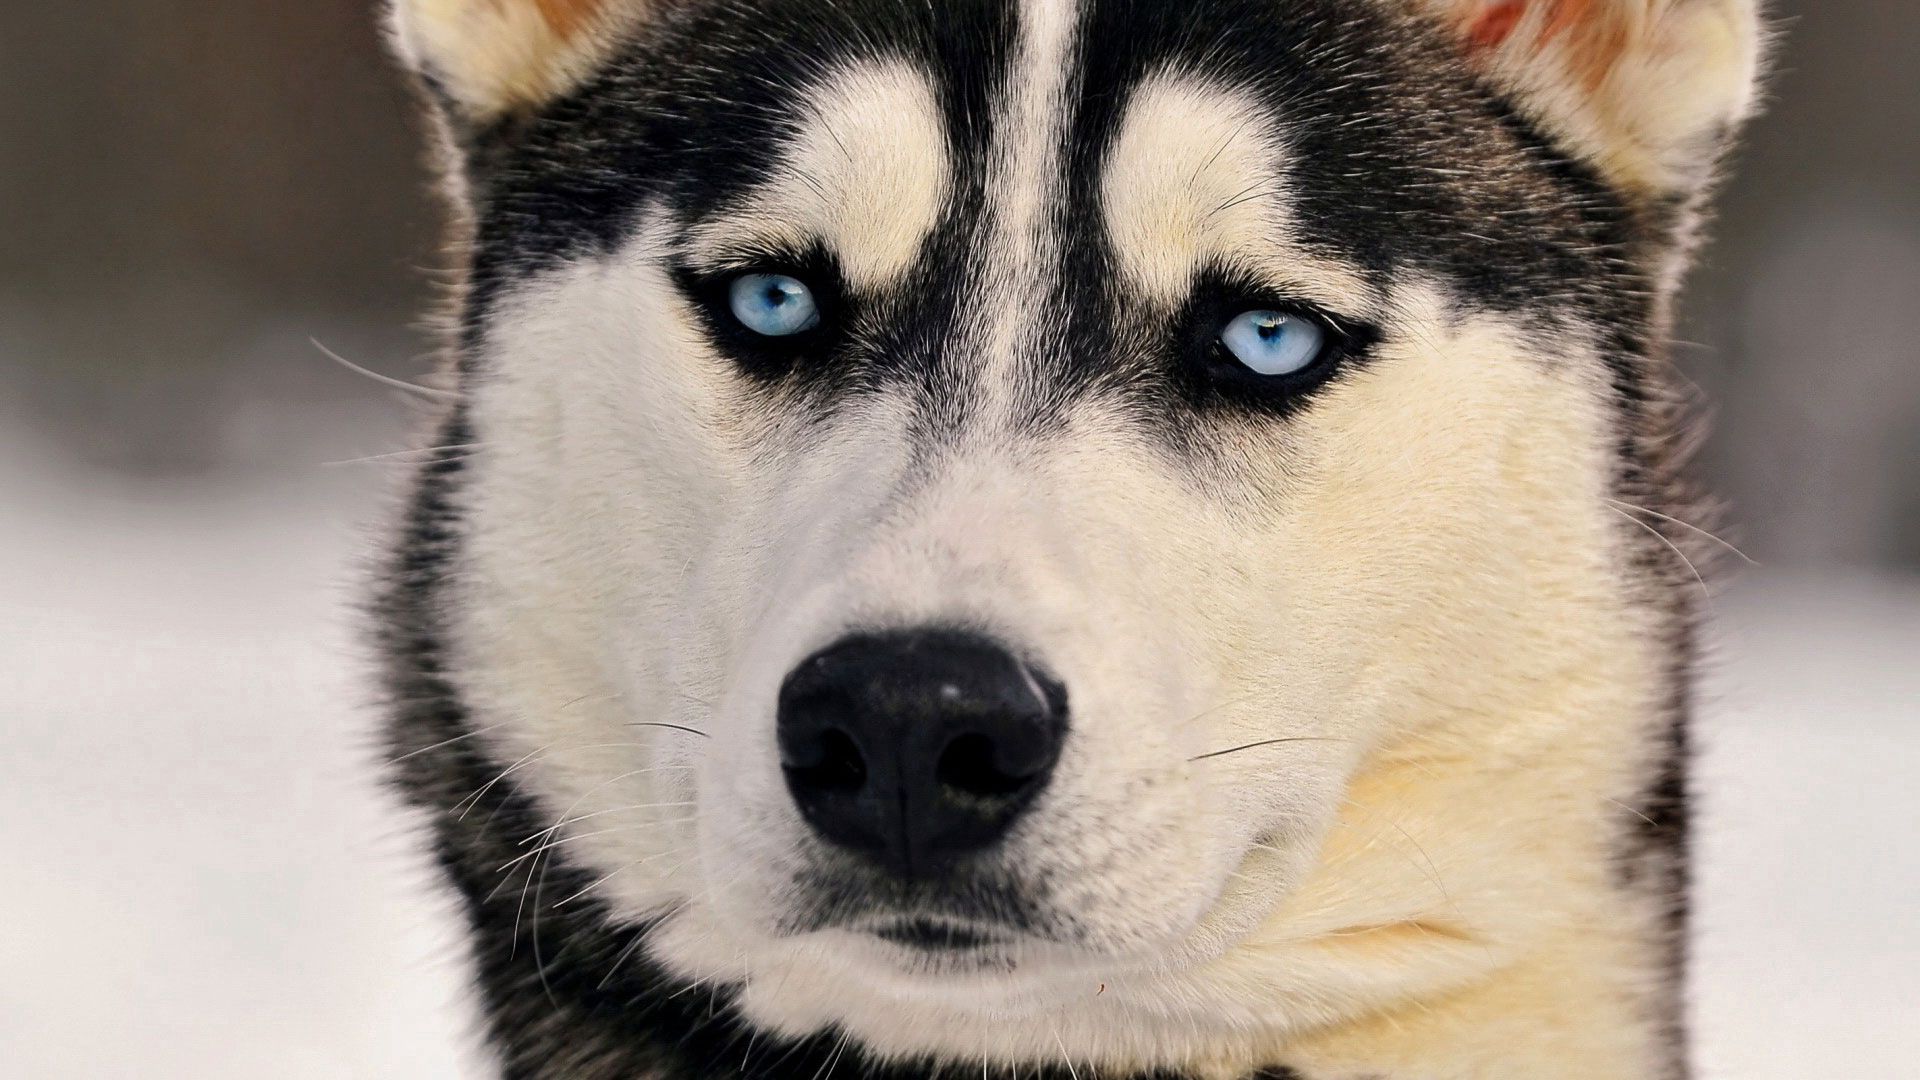 Download wallpaper 1920x1080 dogs, husky, muzzle, eyes hd background